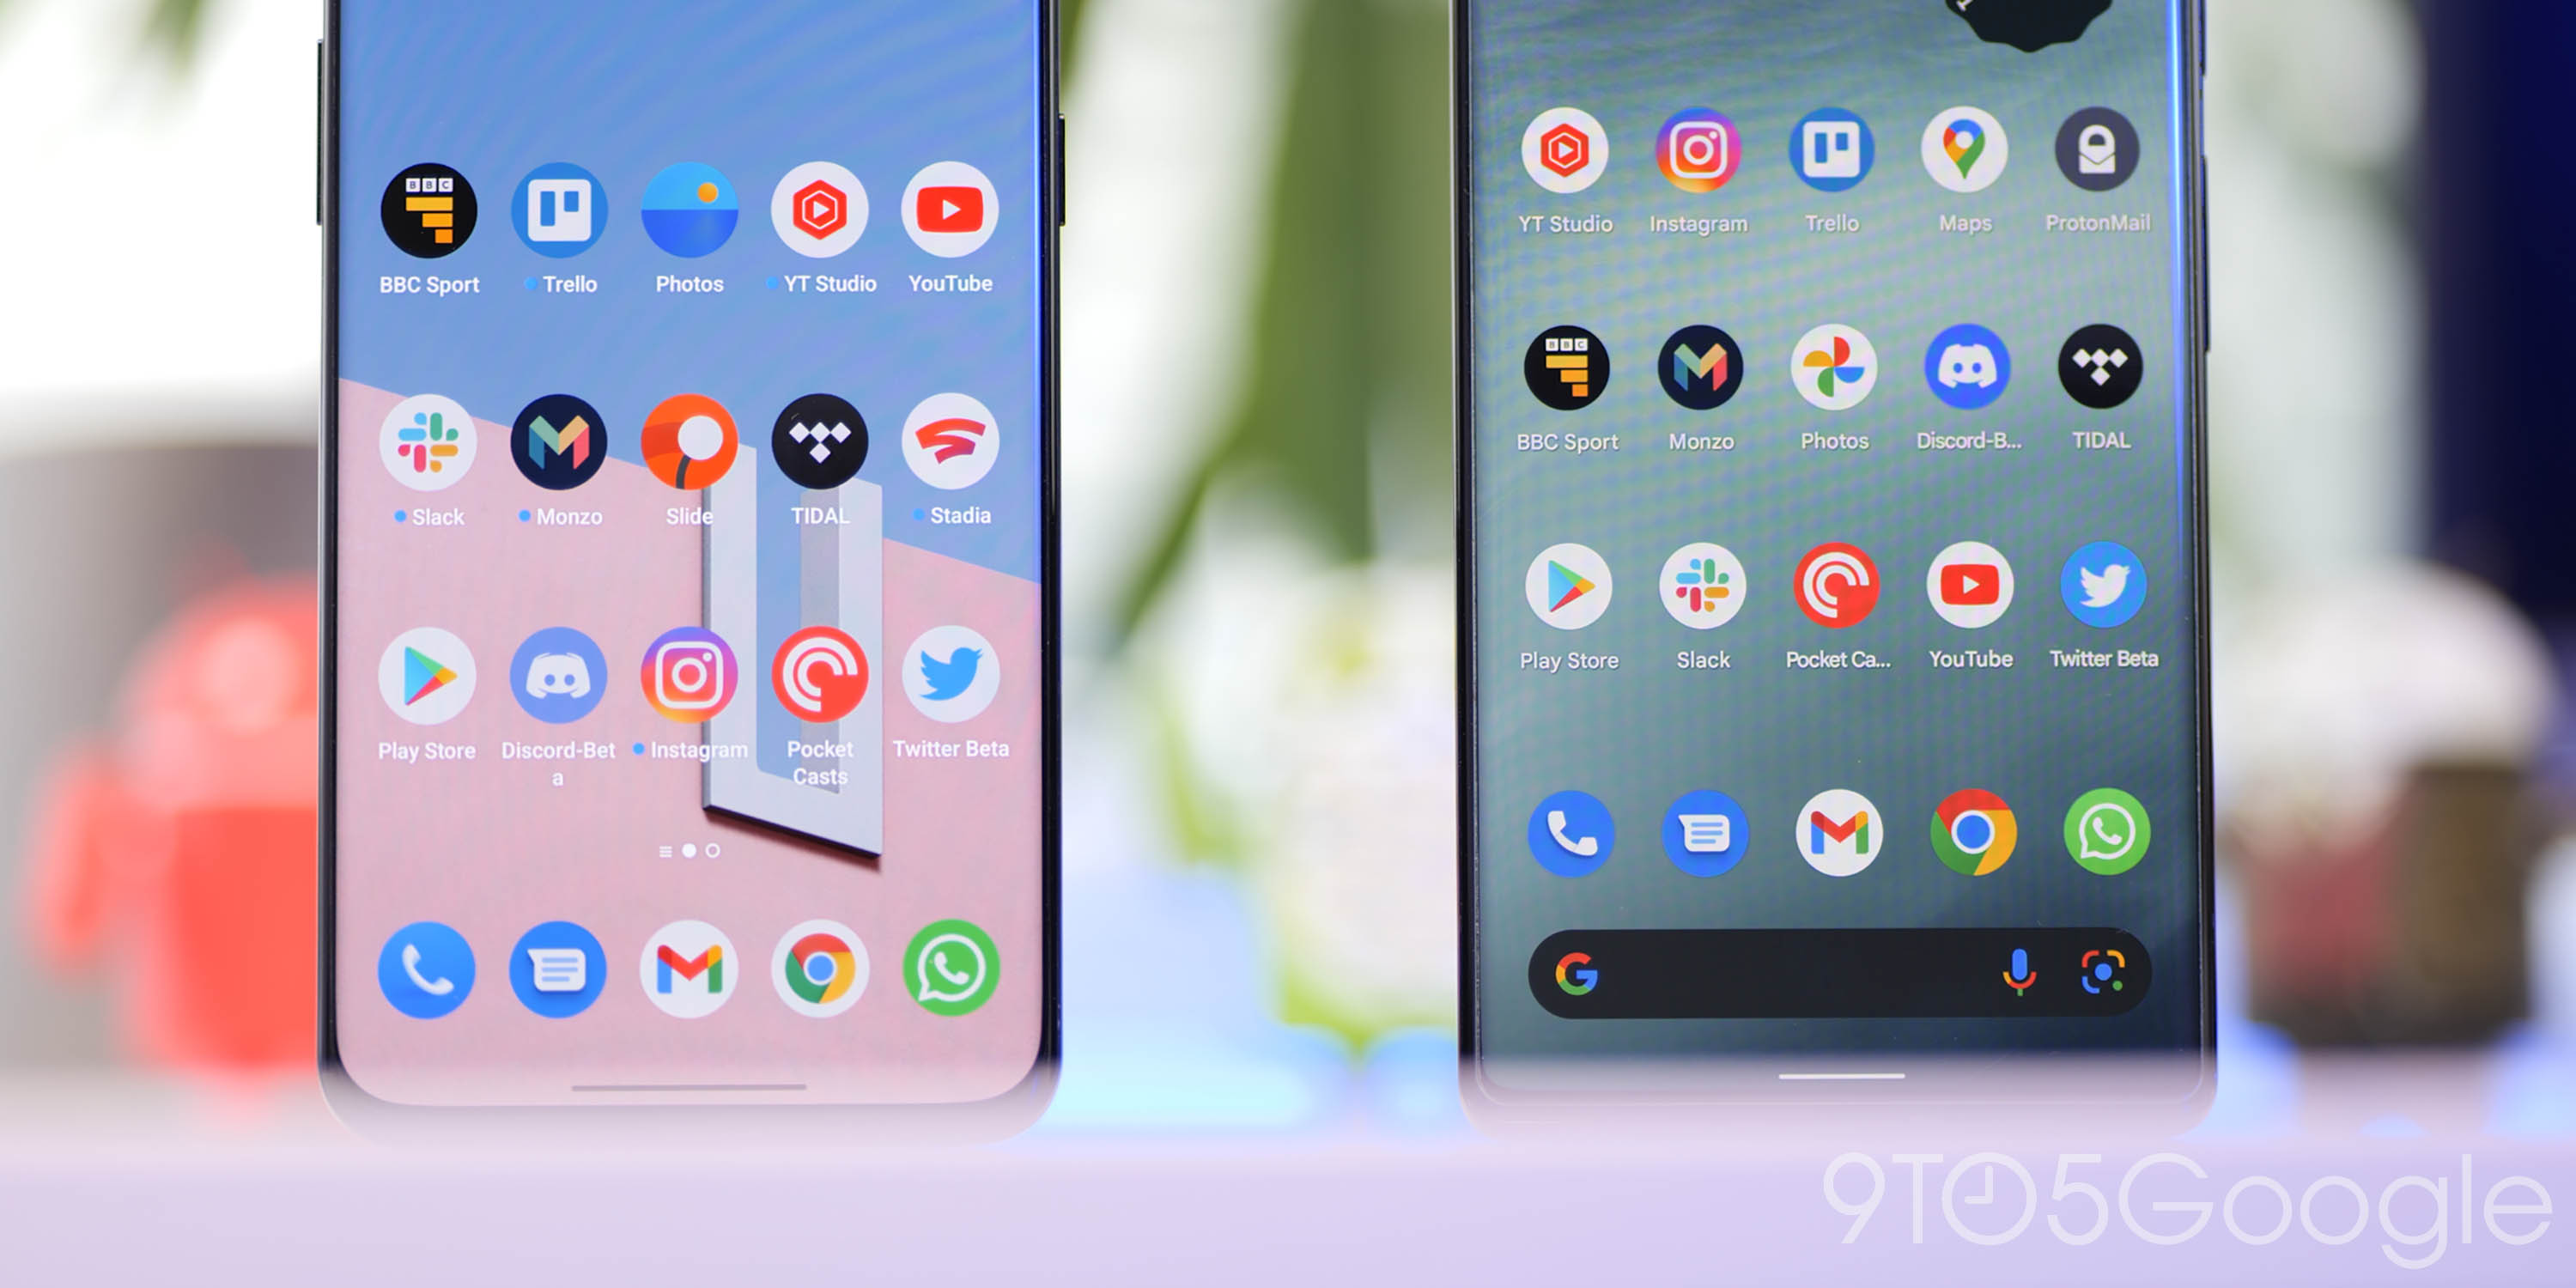 The Pixel 6 Pro and OnePlus 10 Pro screens side-by-side showing the minimal differences in quality